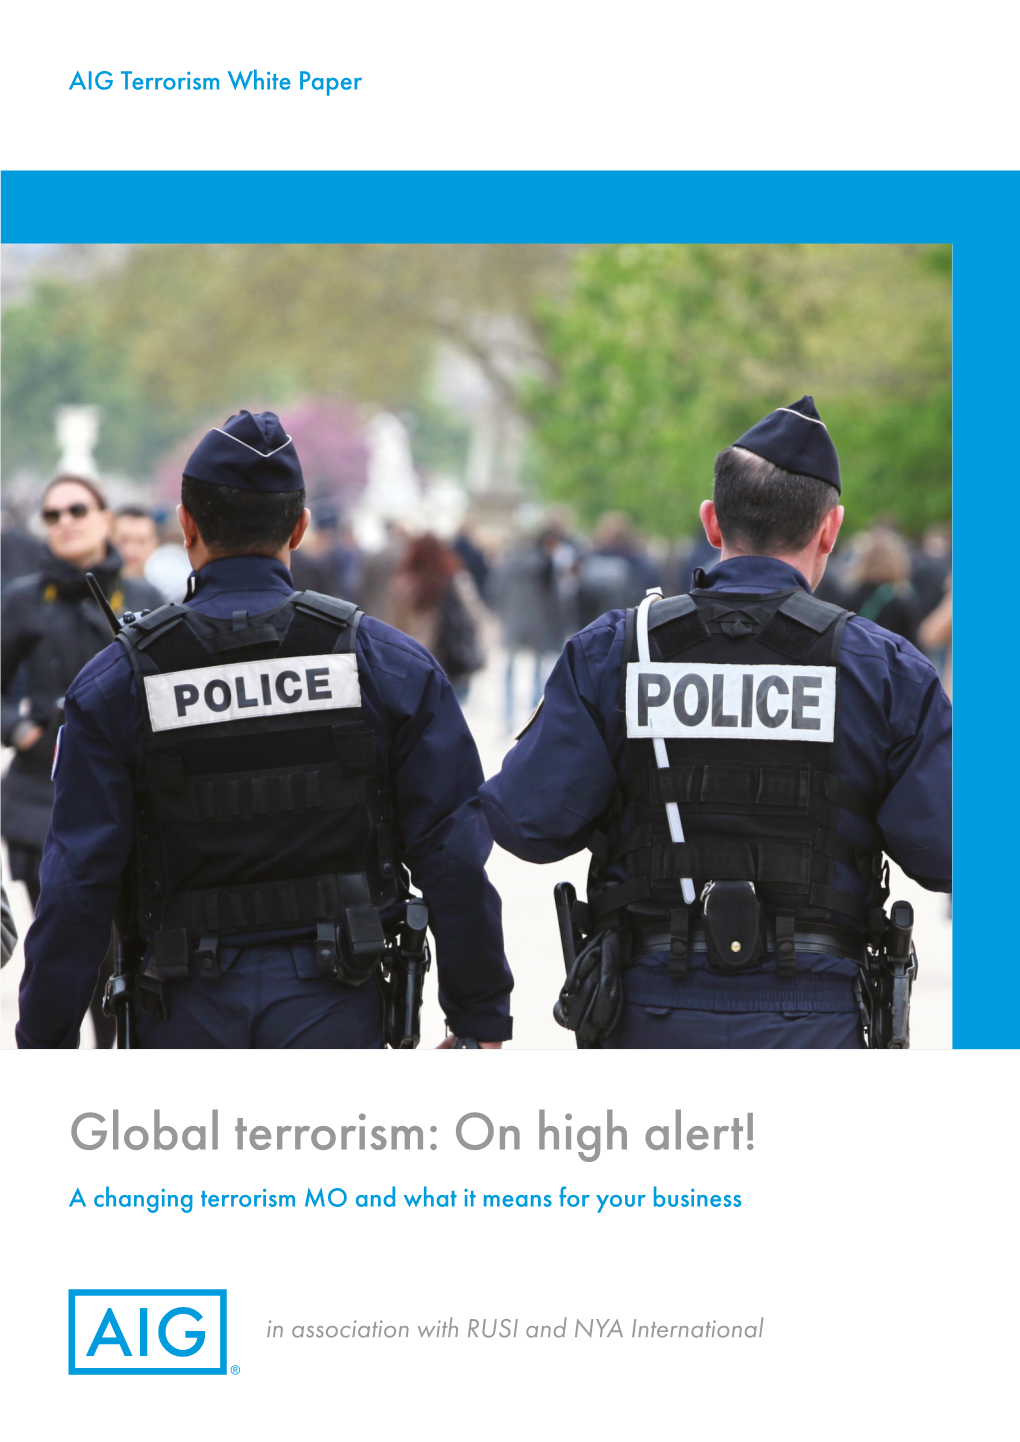 Global Terrorism: on High Alert! a Changing Terrorism MO and What It Means for Your Business